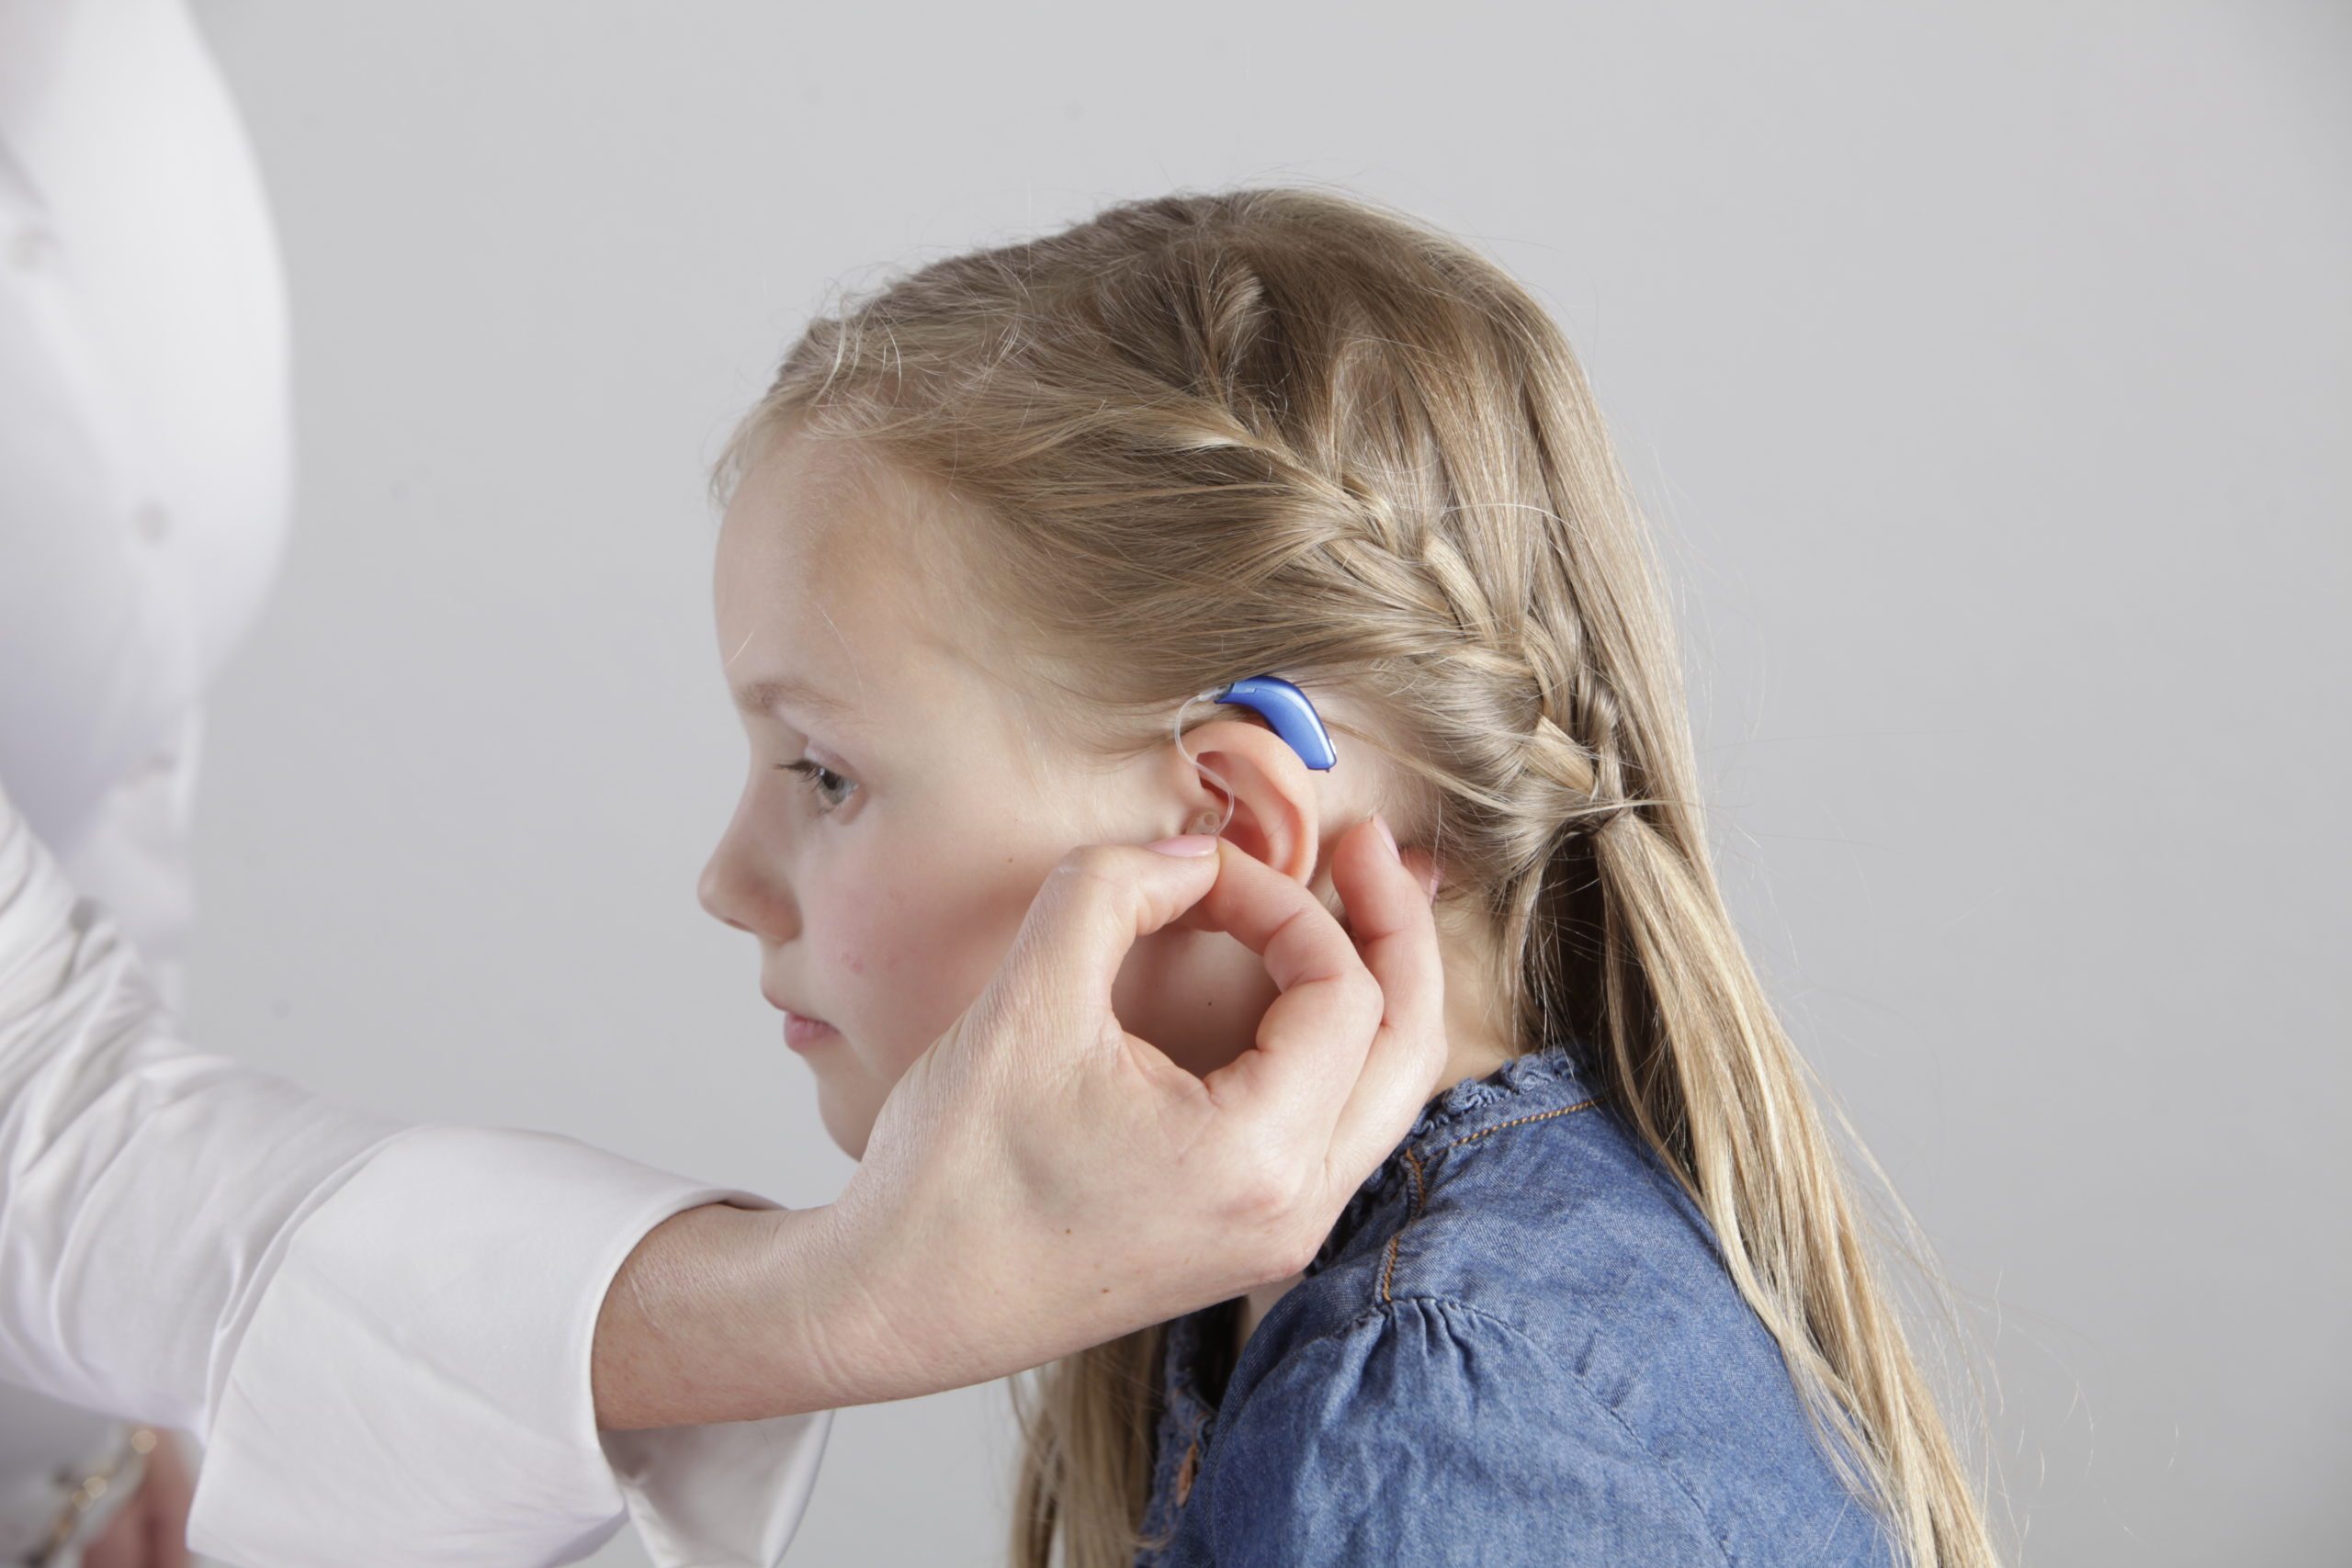 A young girl gets her hearing aid adjusted